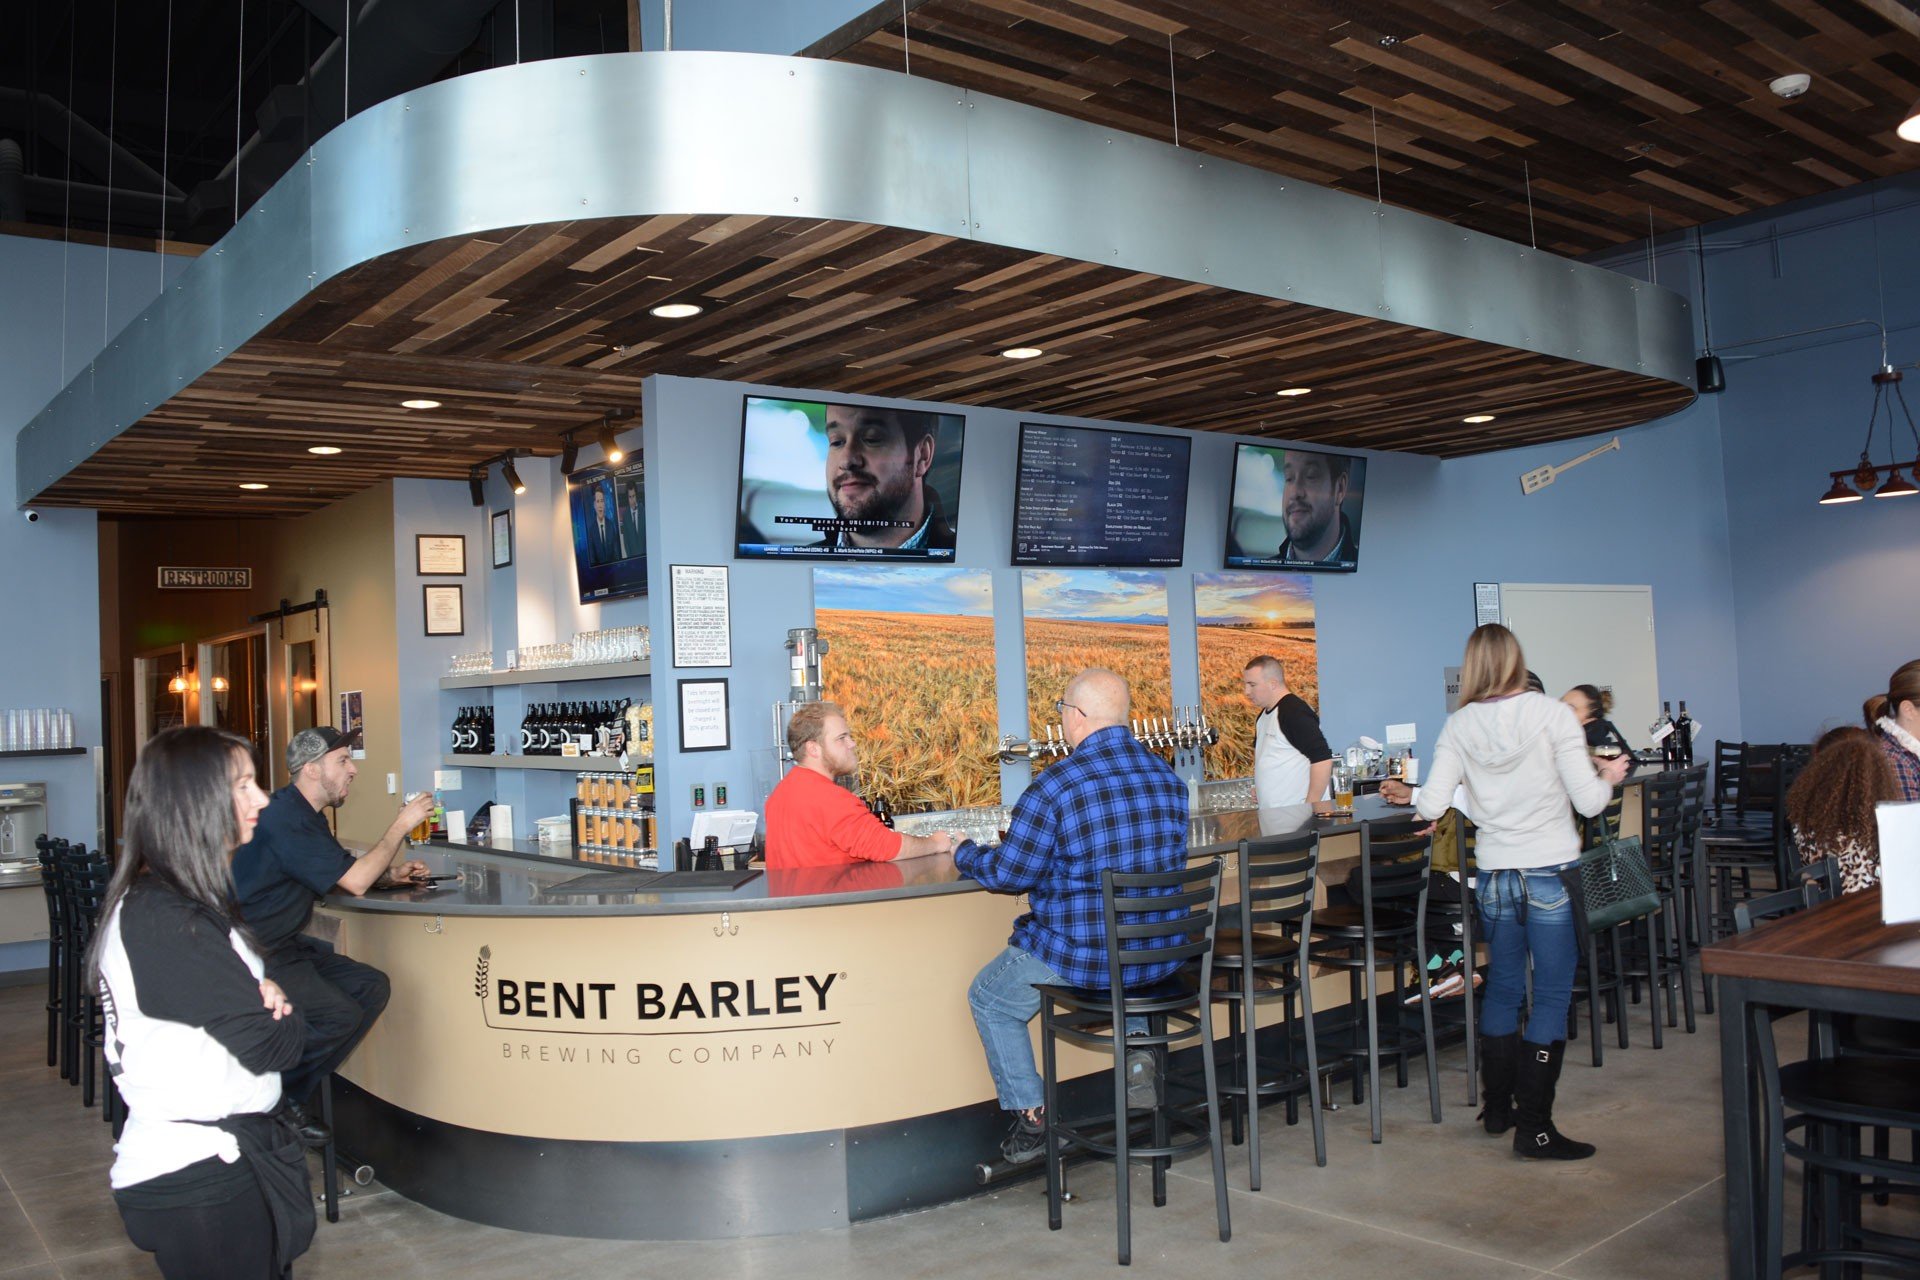 Bent Barley brewery from United States